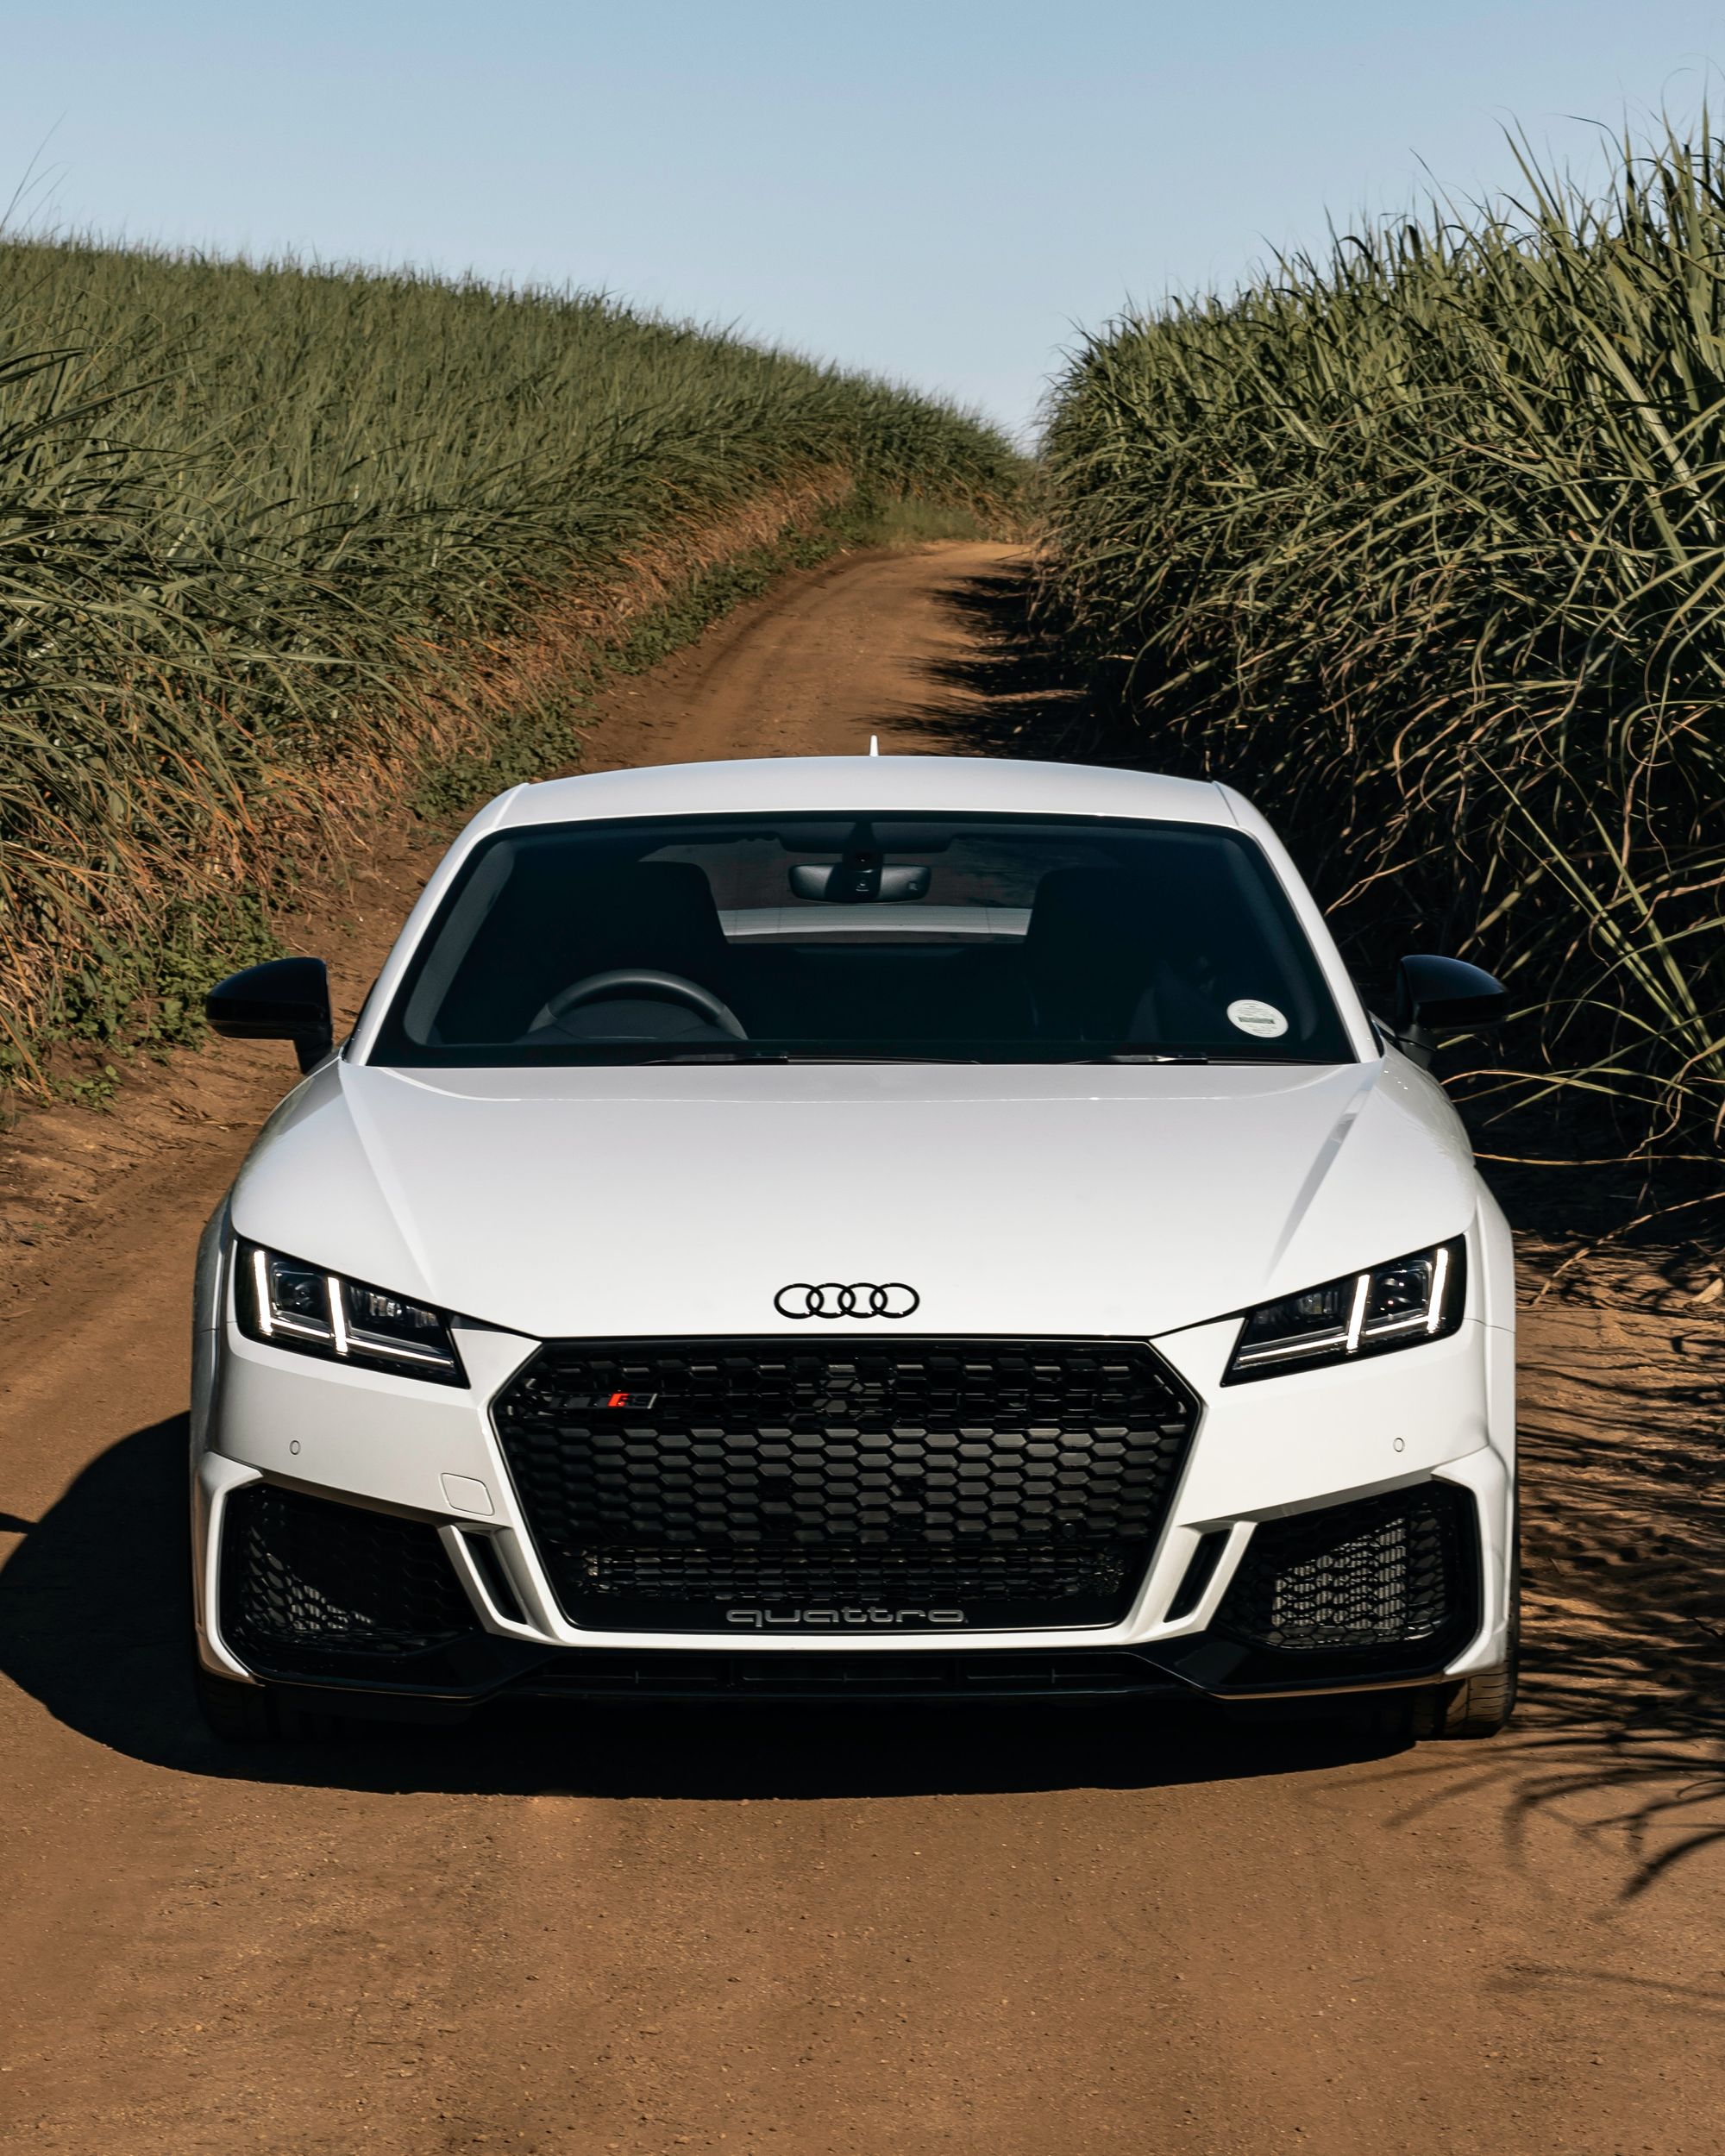 The Best Modifications for Audi RS Models